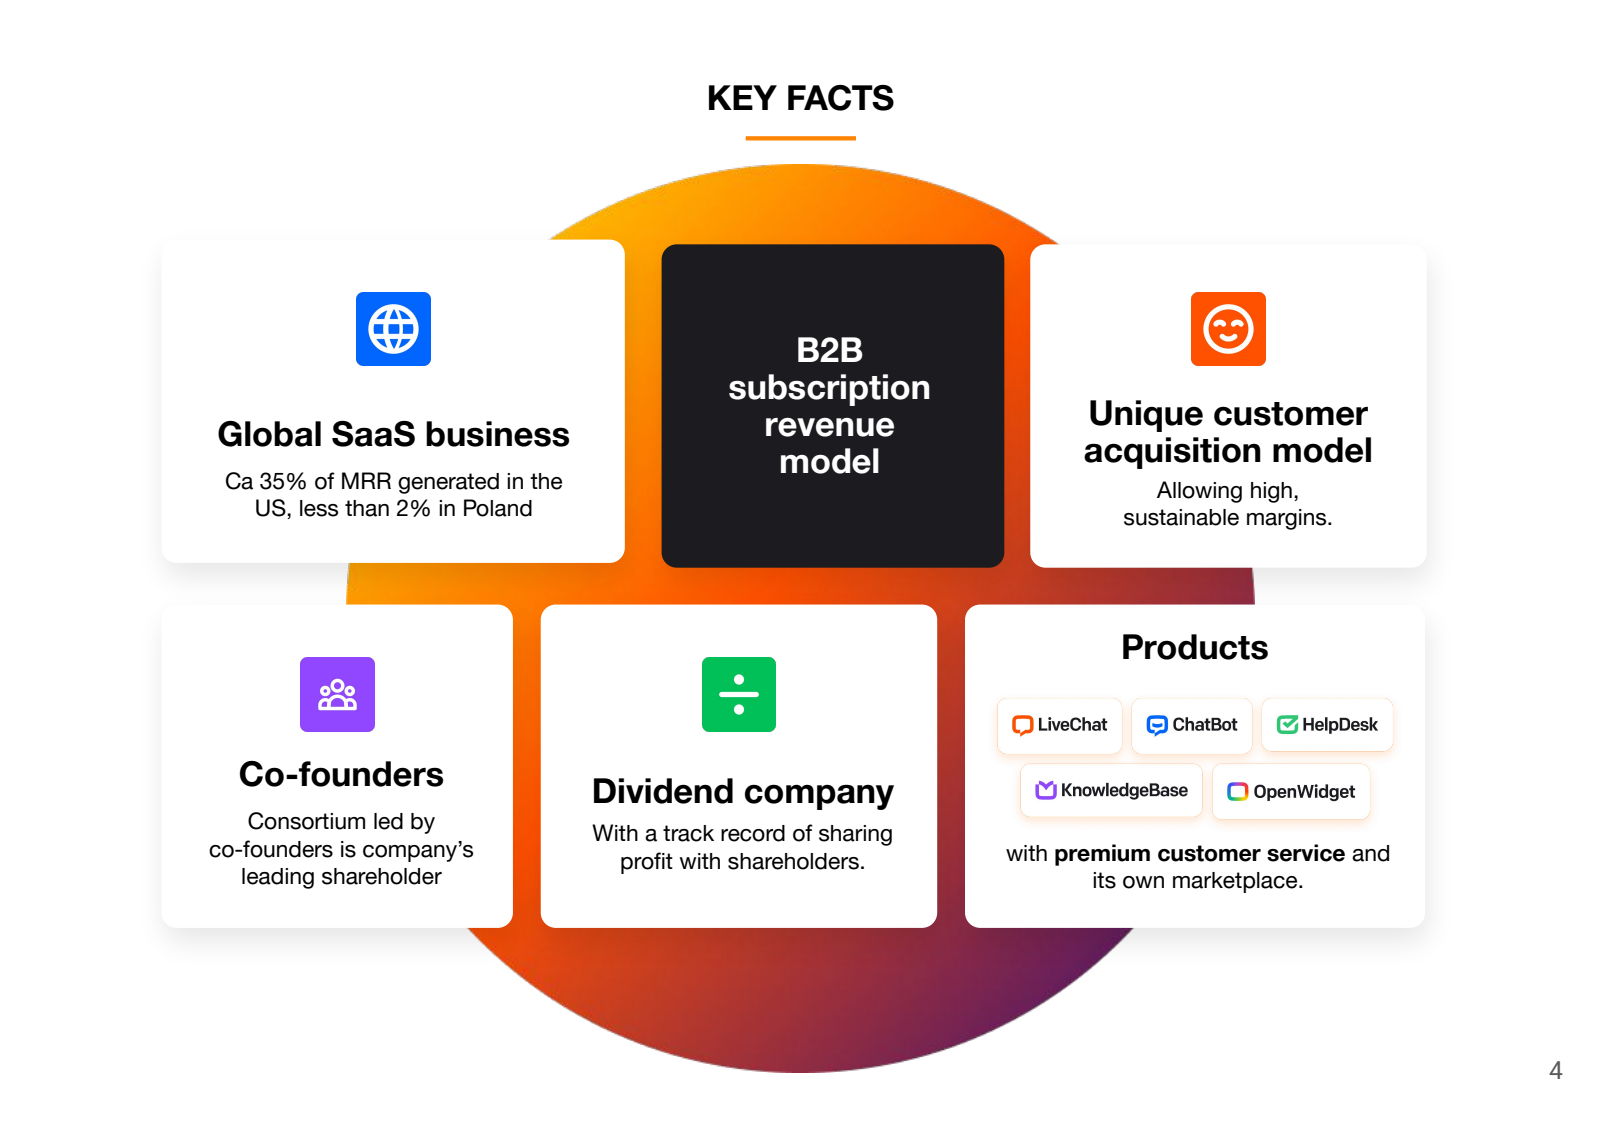 KEY FACTS 

Global S